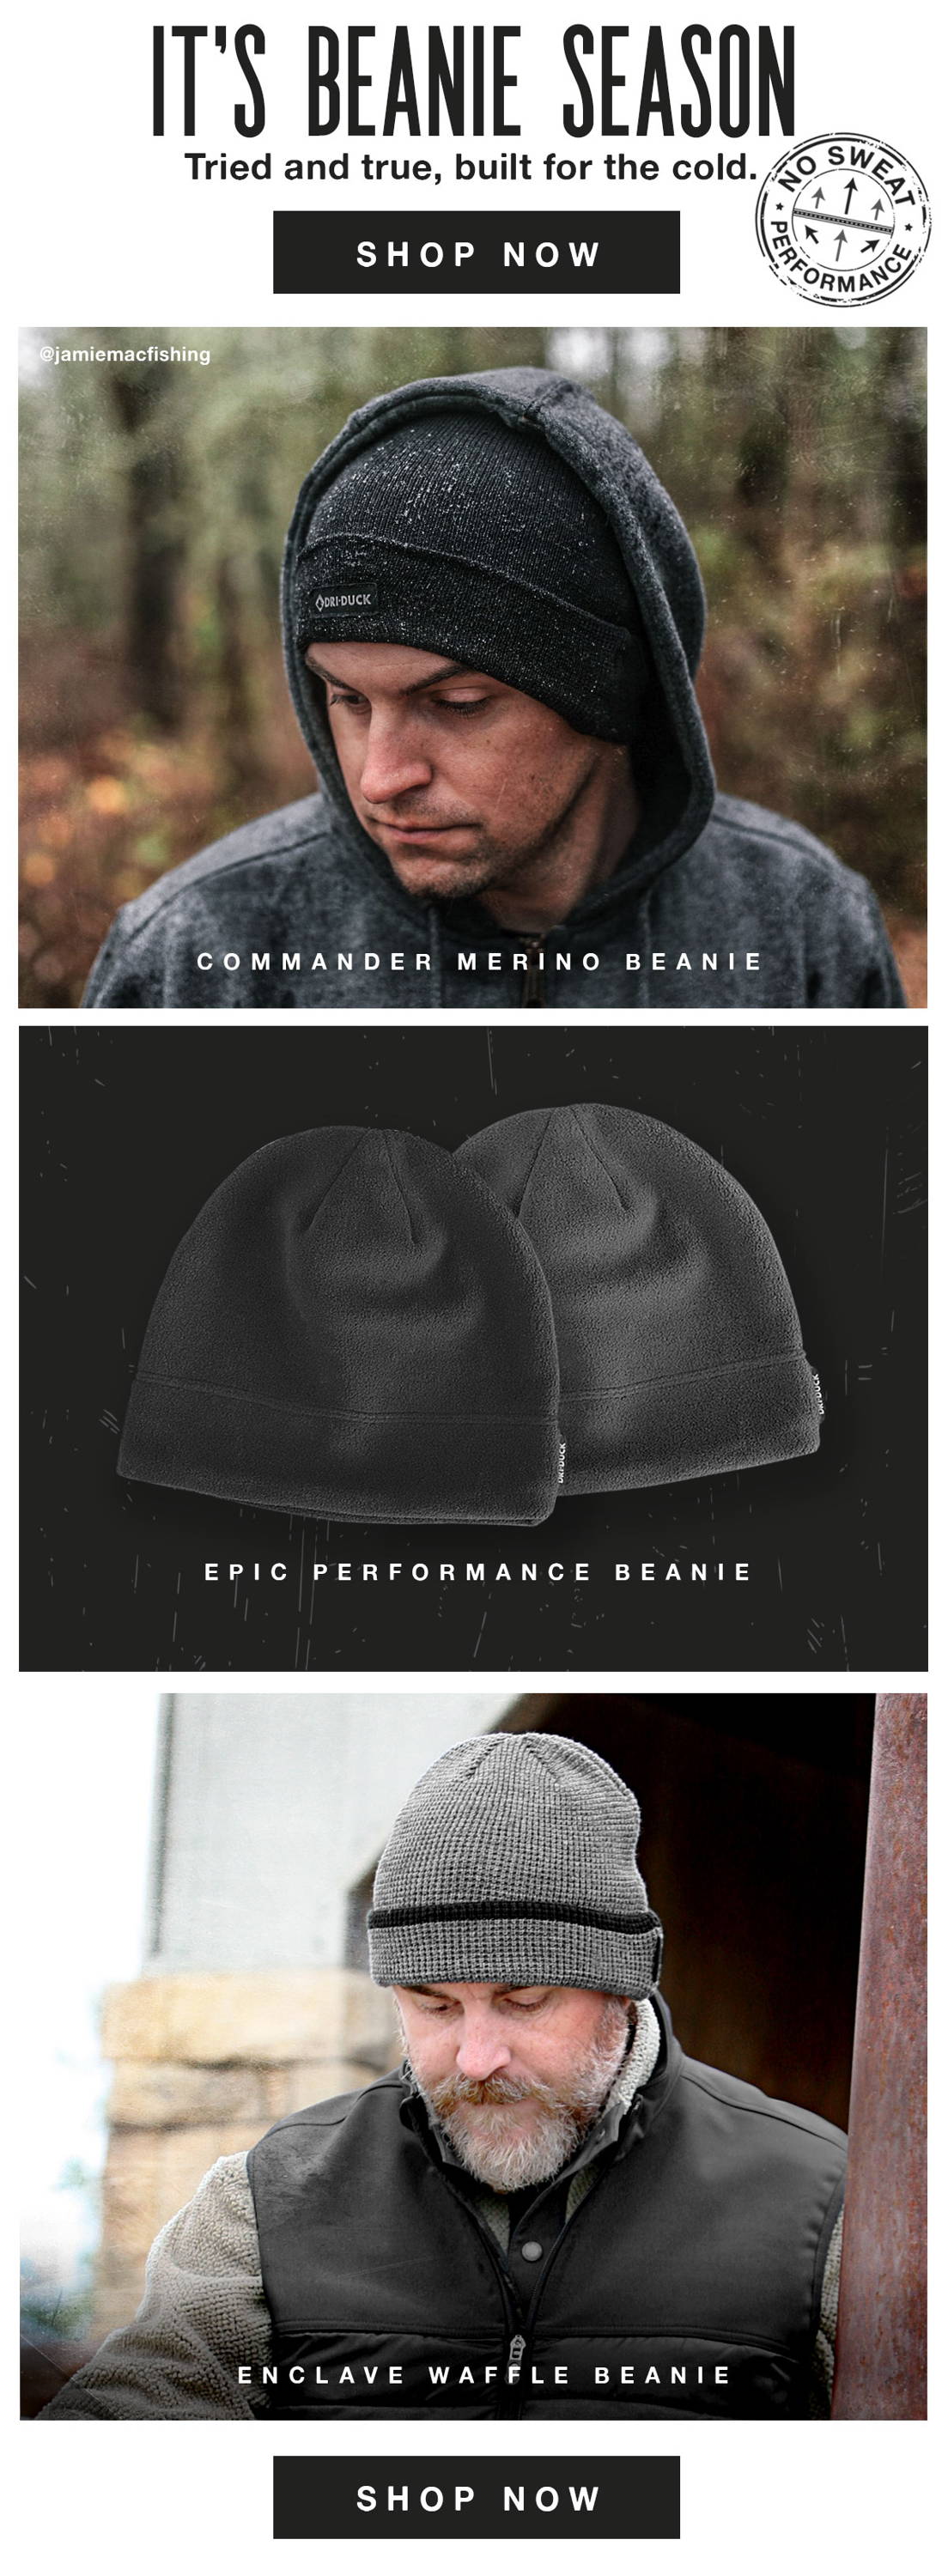 Variety of models wearing beanies from DRI DUCK